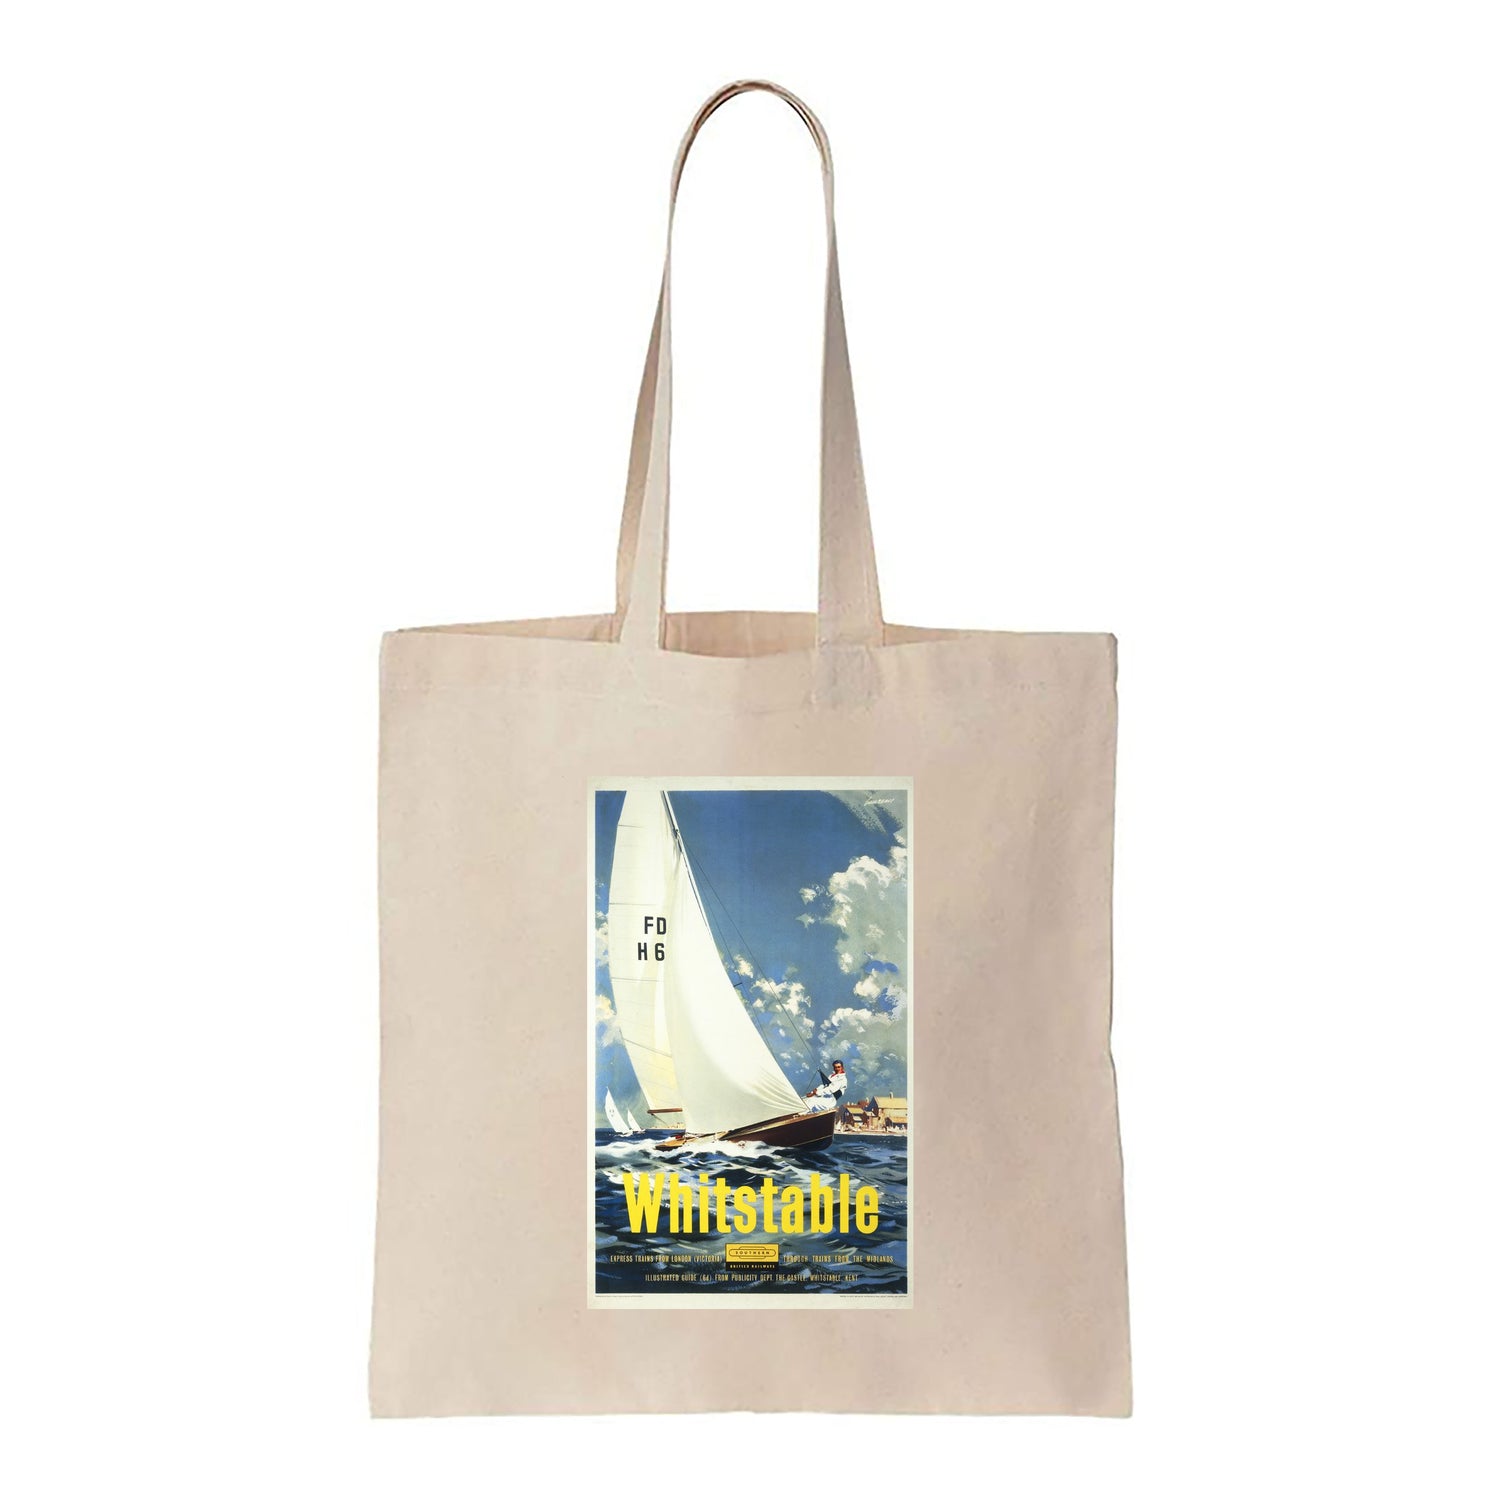 Whitstable - Canvas Tote Bag